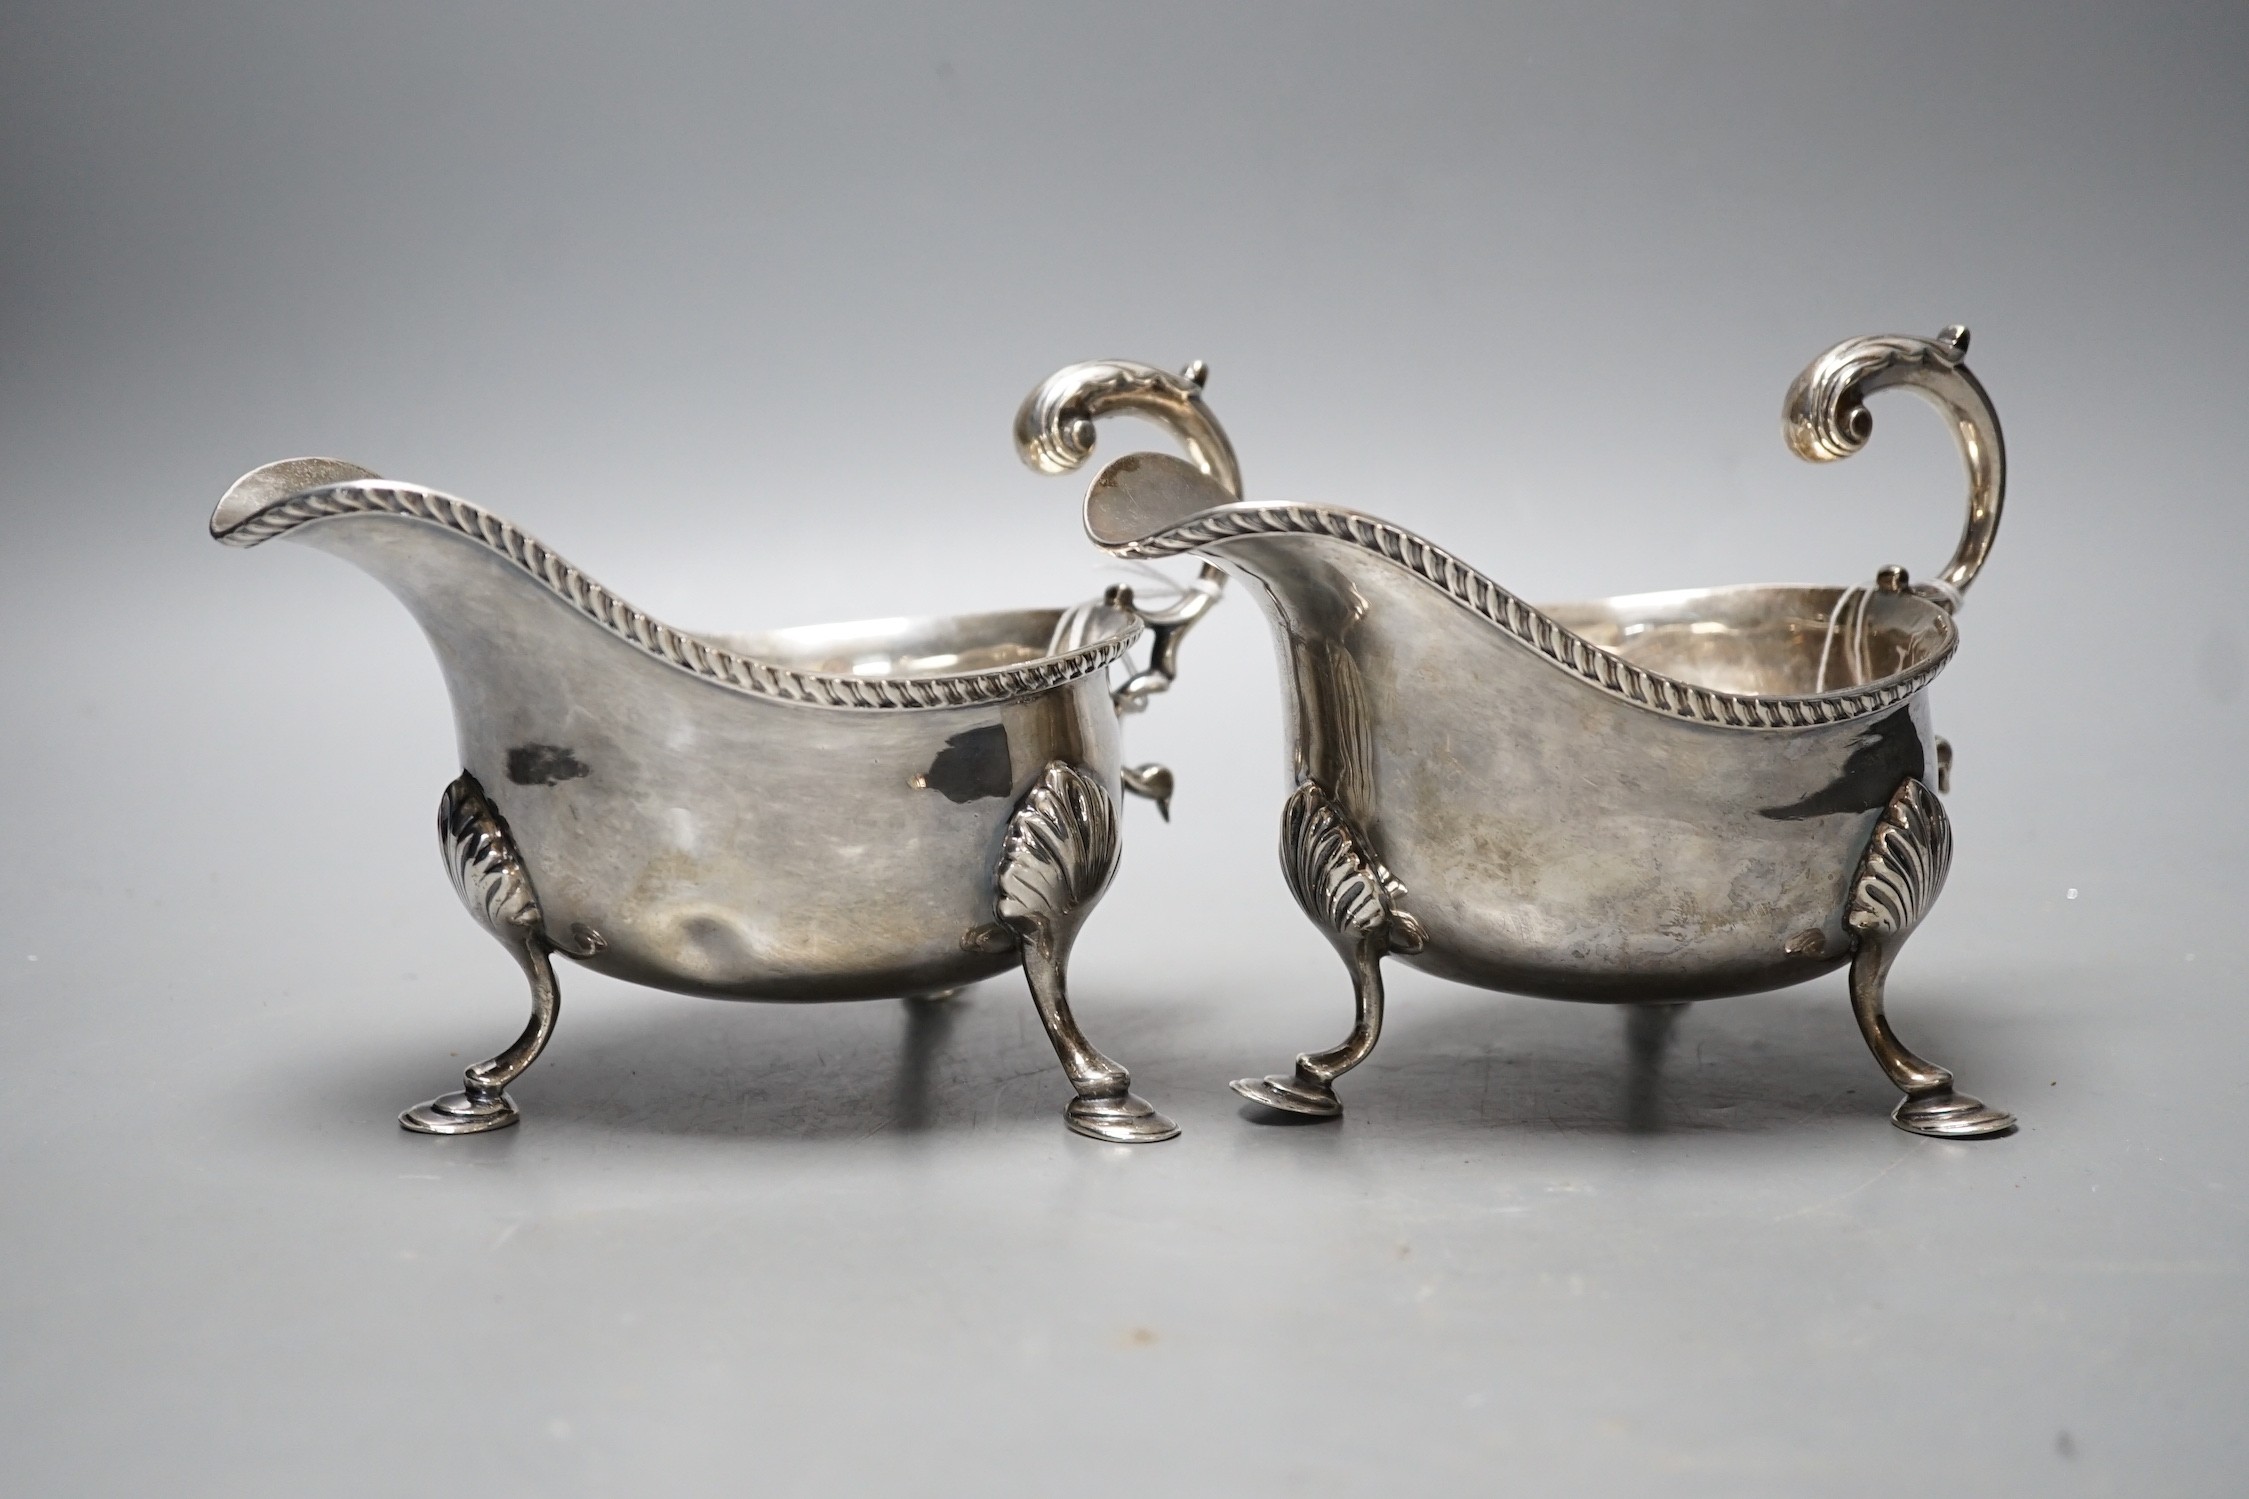 A pair of Edwardian silver sauceboats, with flying scroll handles, Nathan & Hayes, Chester, 1902, 17.7oz.